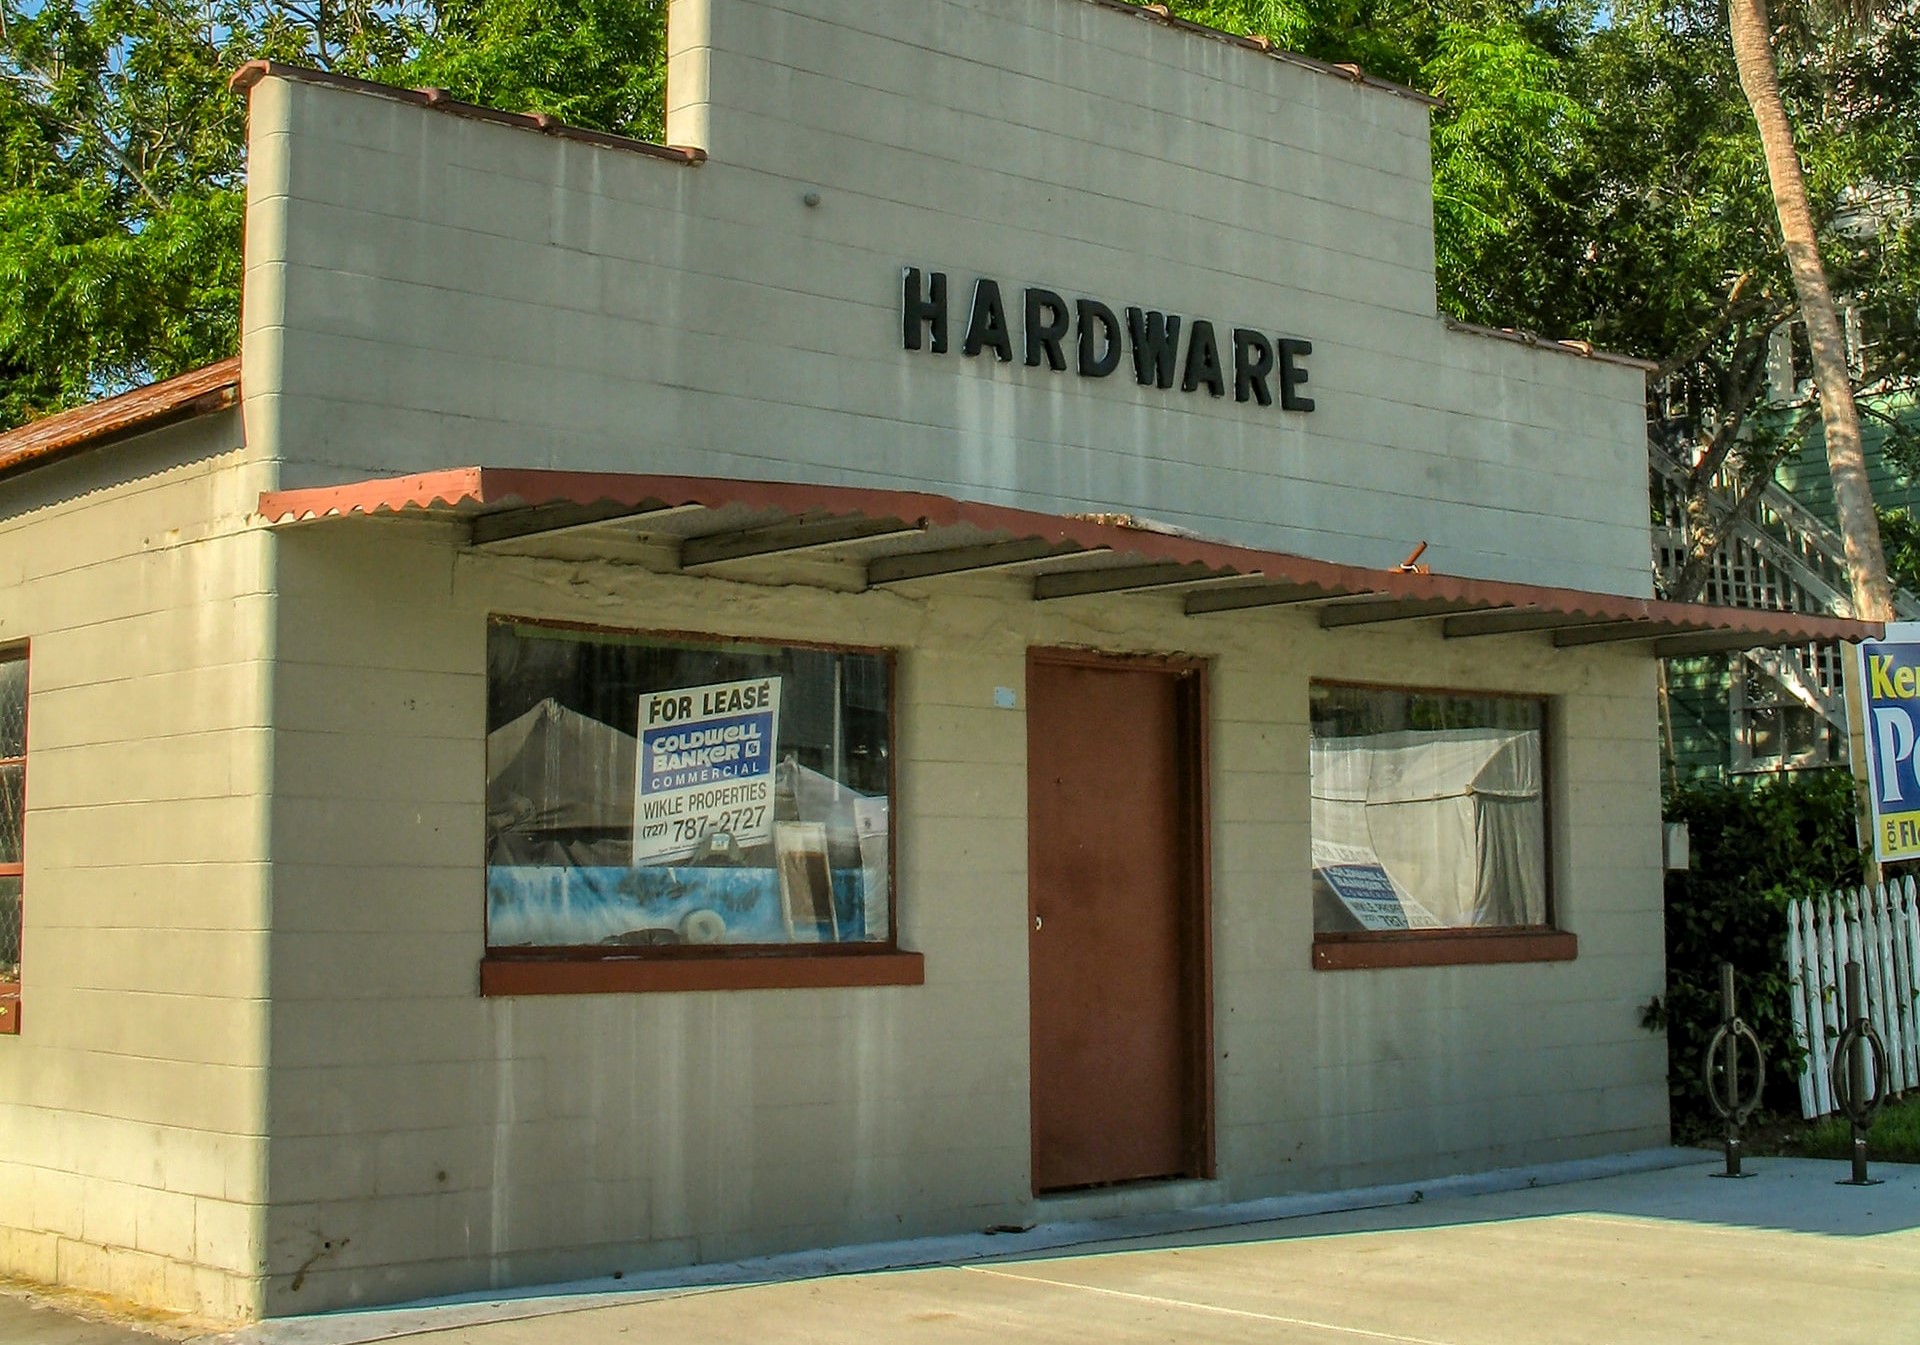 How to start your own hardware store?